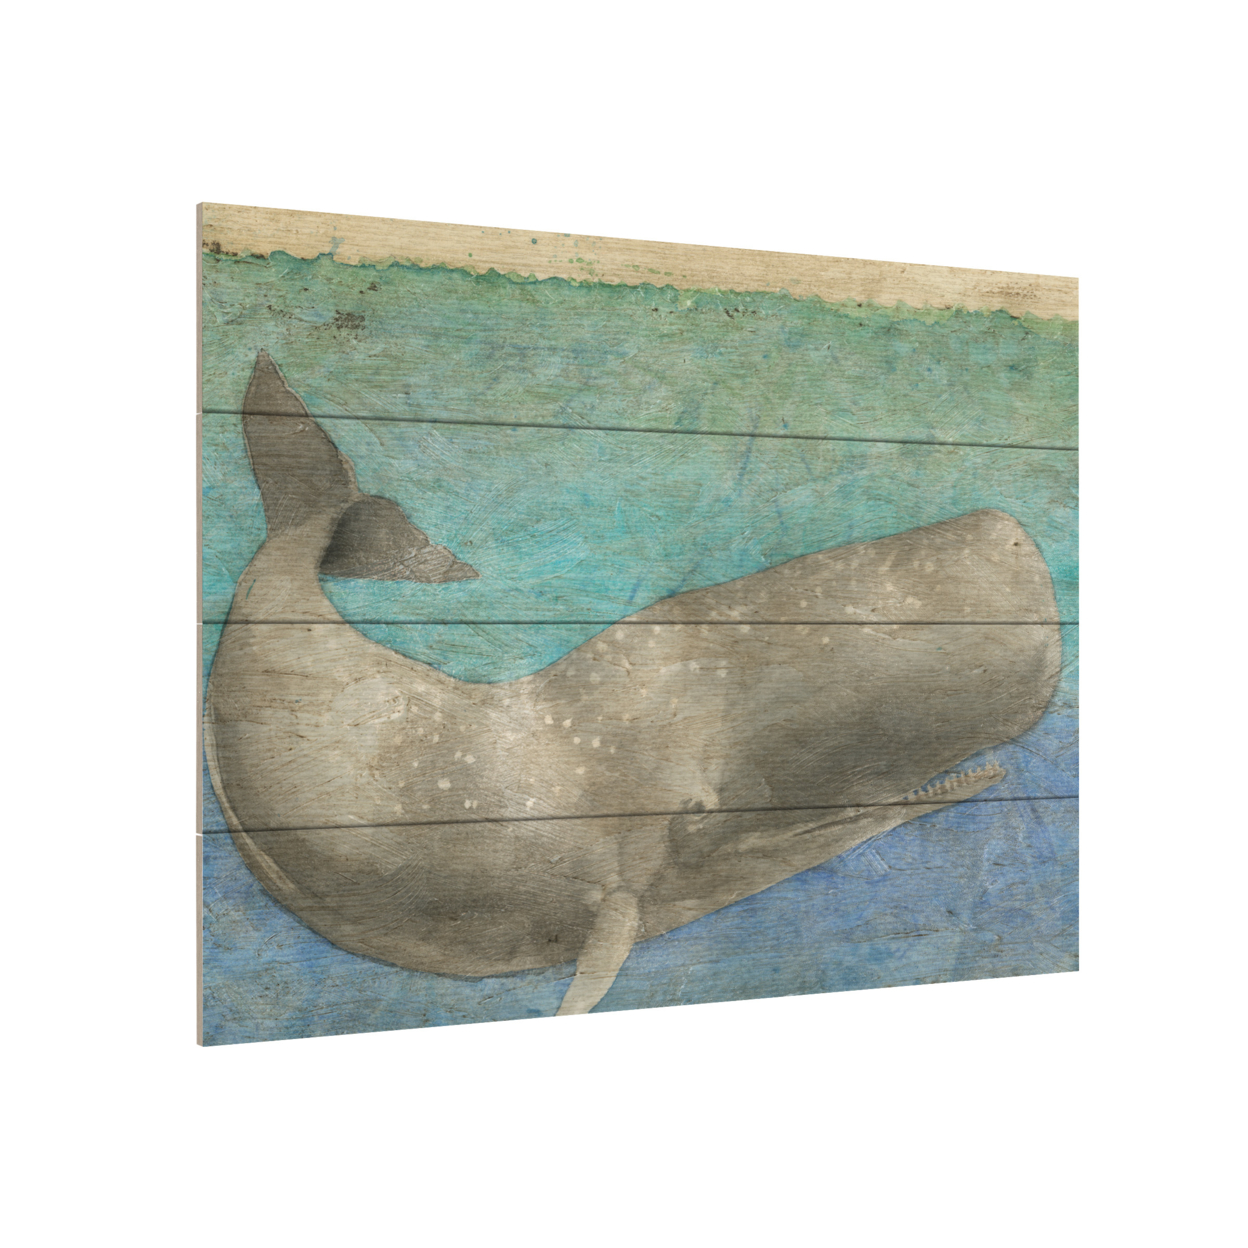 Wall Art 12 X 16 Inches Titled Diving Whale Ii Ready To Hang Printed On Wooden Planks